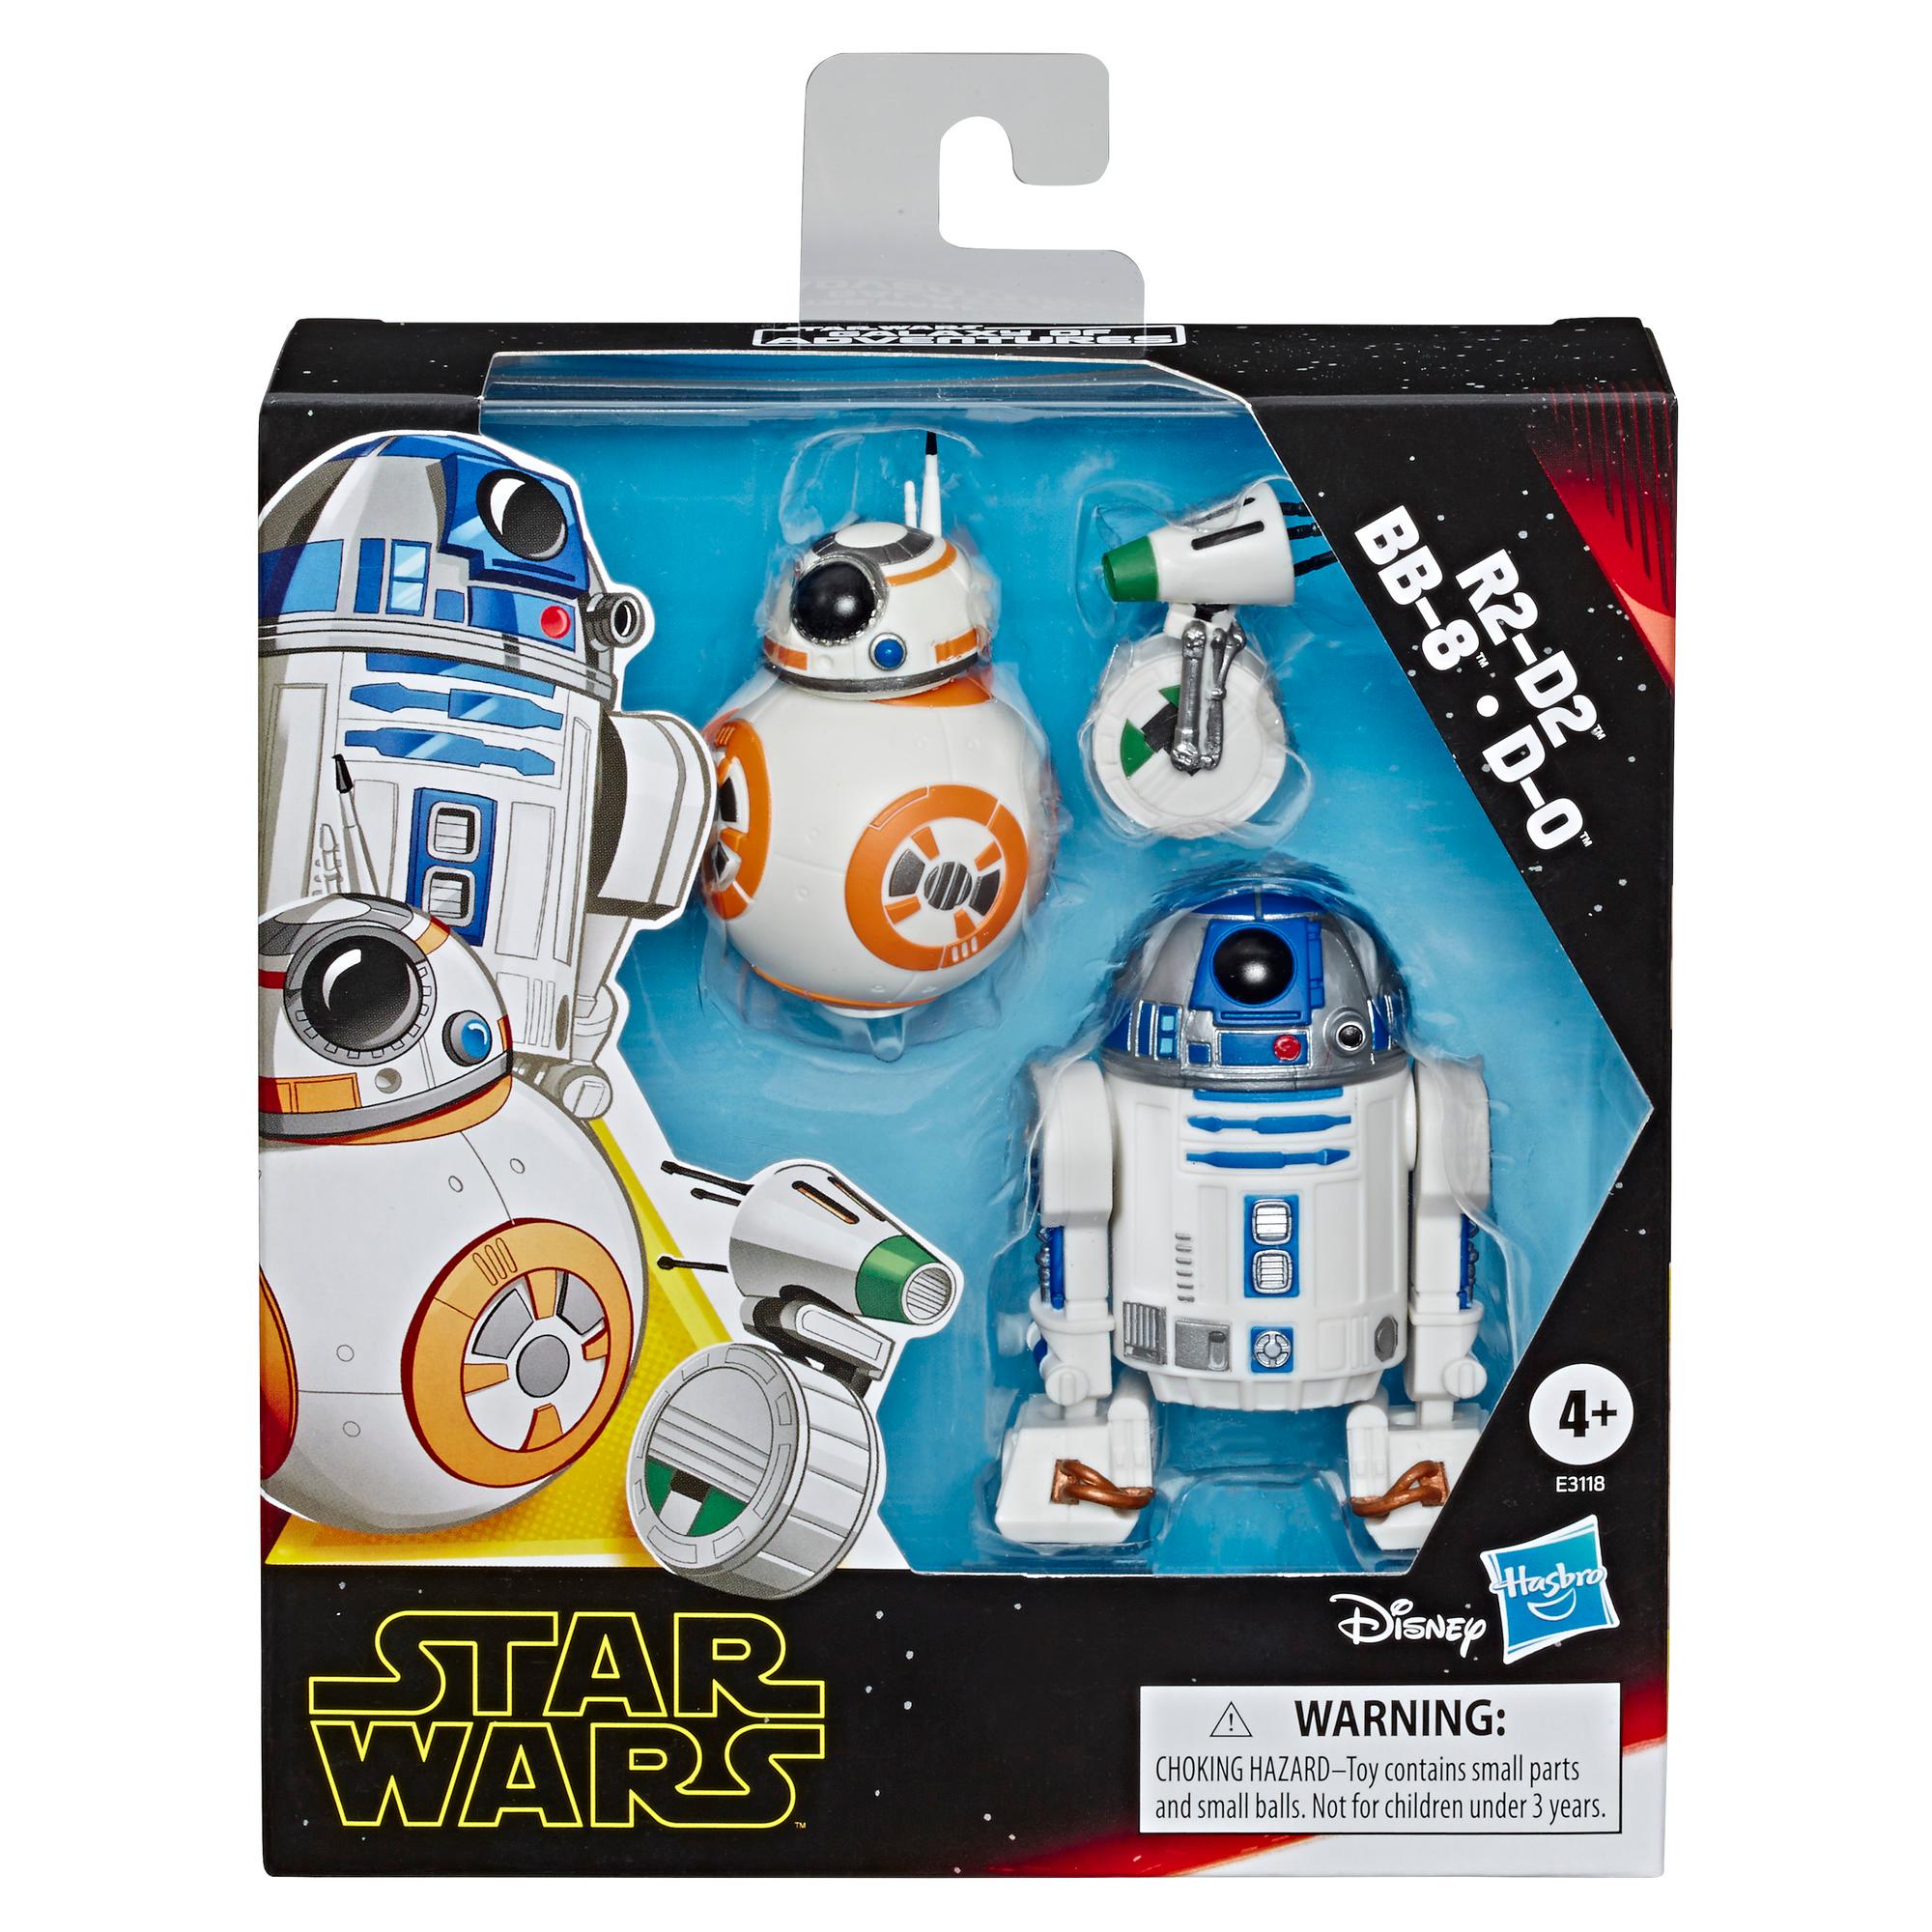 Hasbro Star Wars: Galaxy of Adventures BB-8 D-O 3-Pack Toy Droid Figures for sale online R2-D2